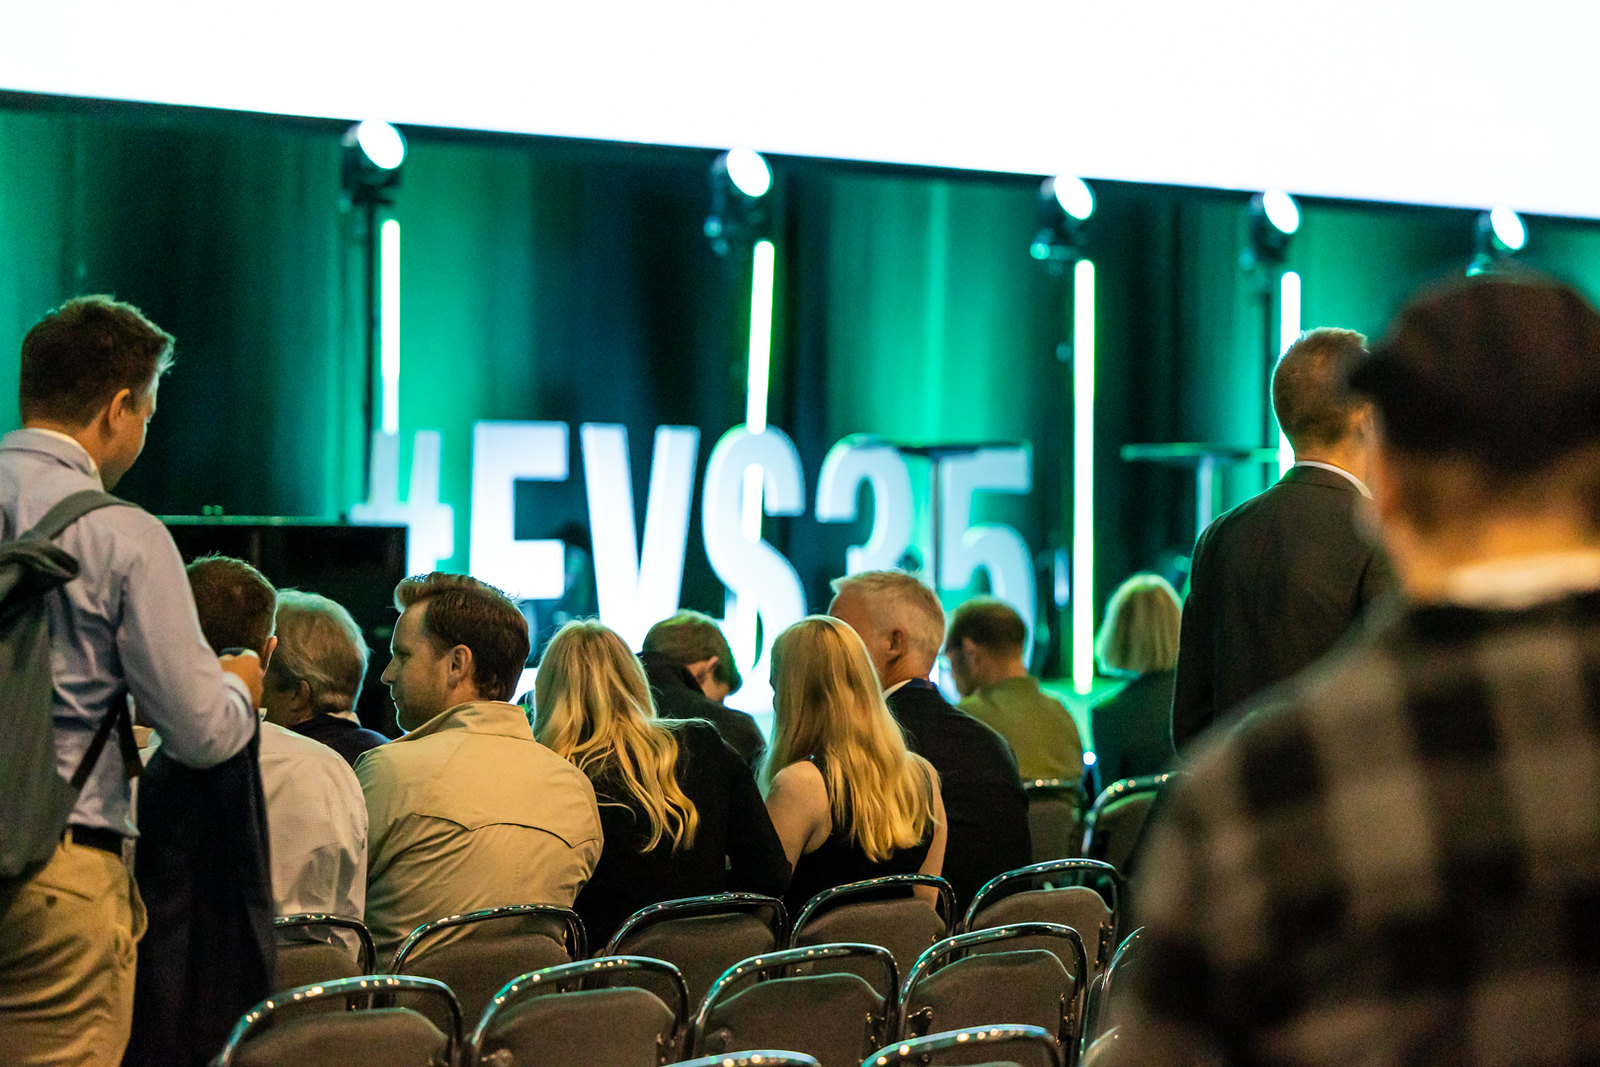 EVS35 Day 1